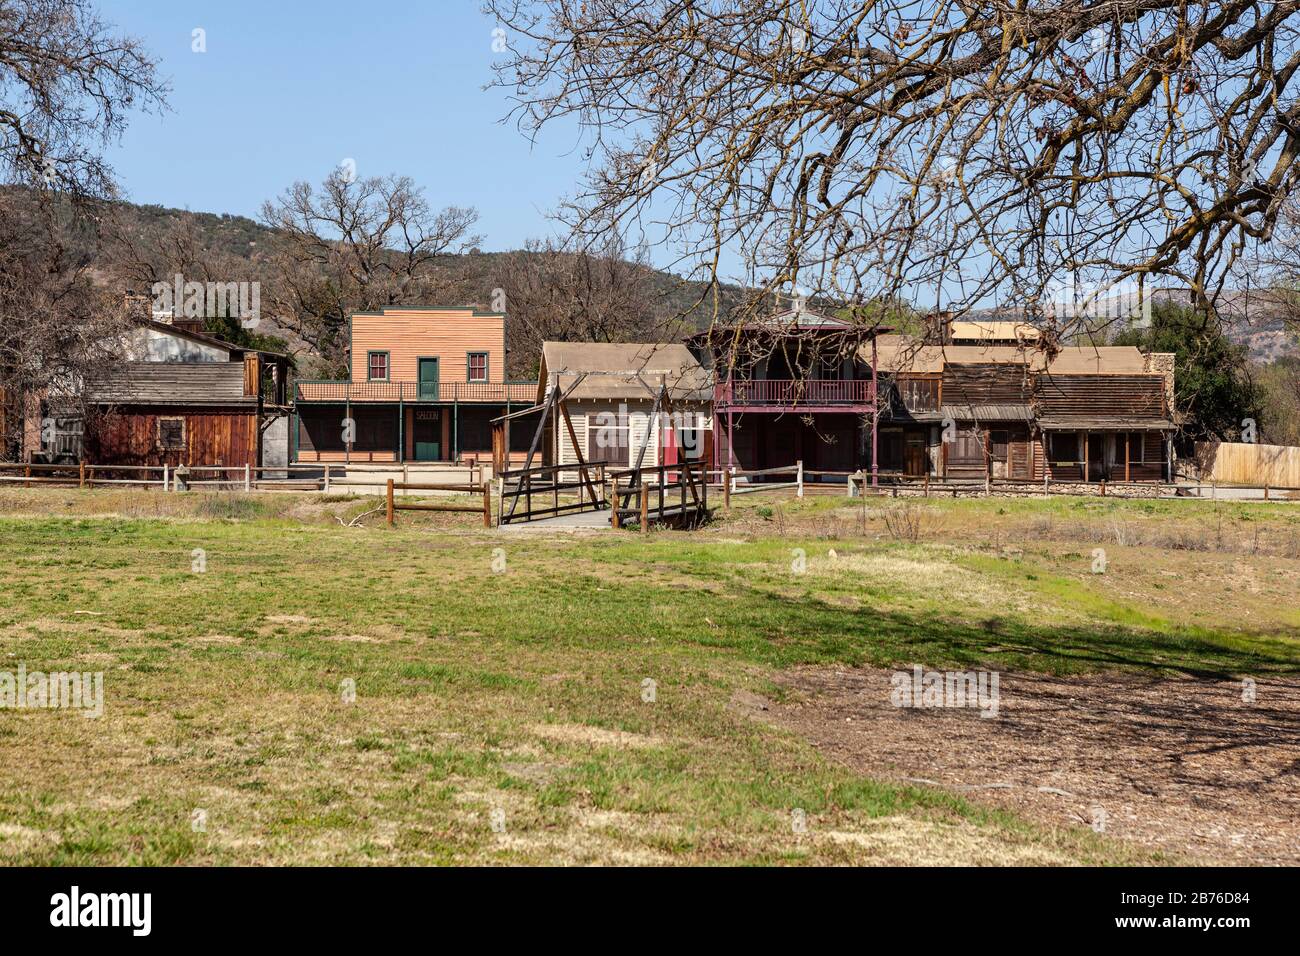 Old historic movie sets owned by US National Park in the Santa Monica Mountains Recreation Area at the Paramount Ranch site near Los Angeles Ca. Stock Photo